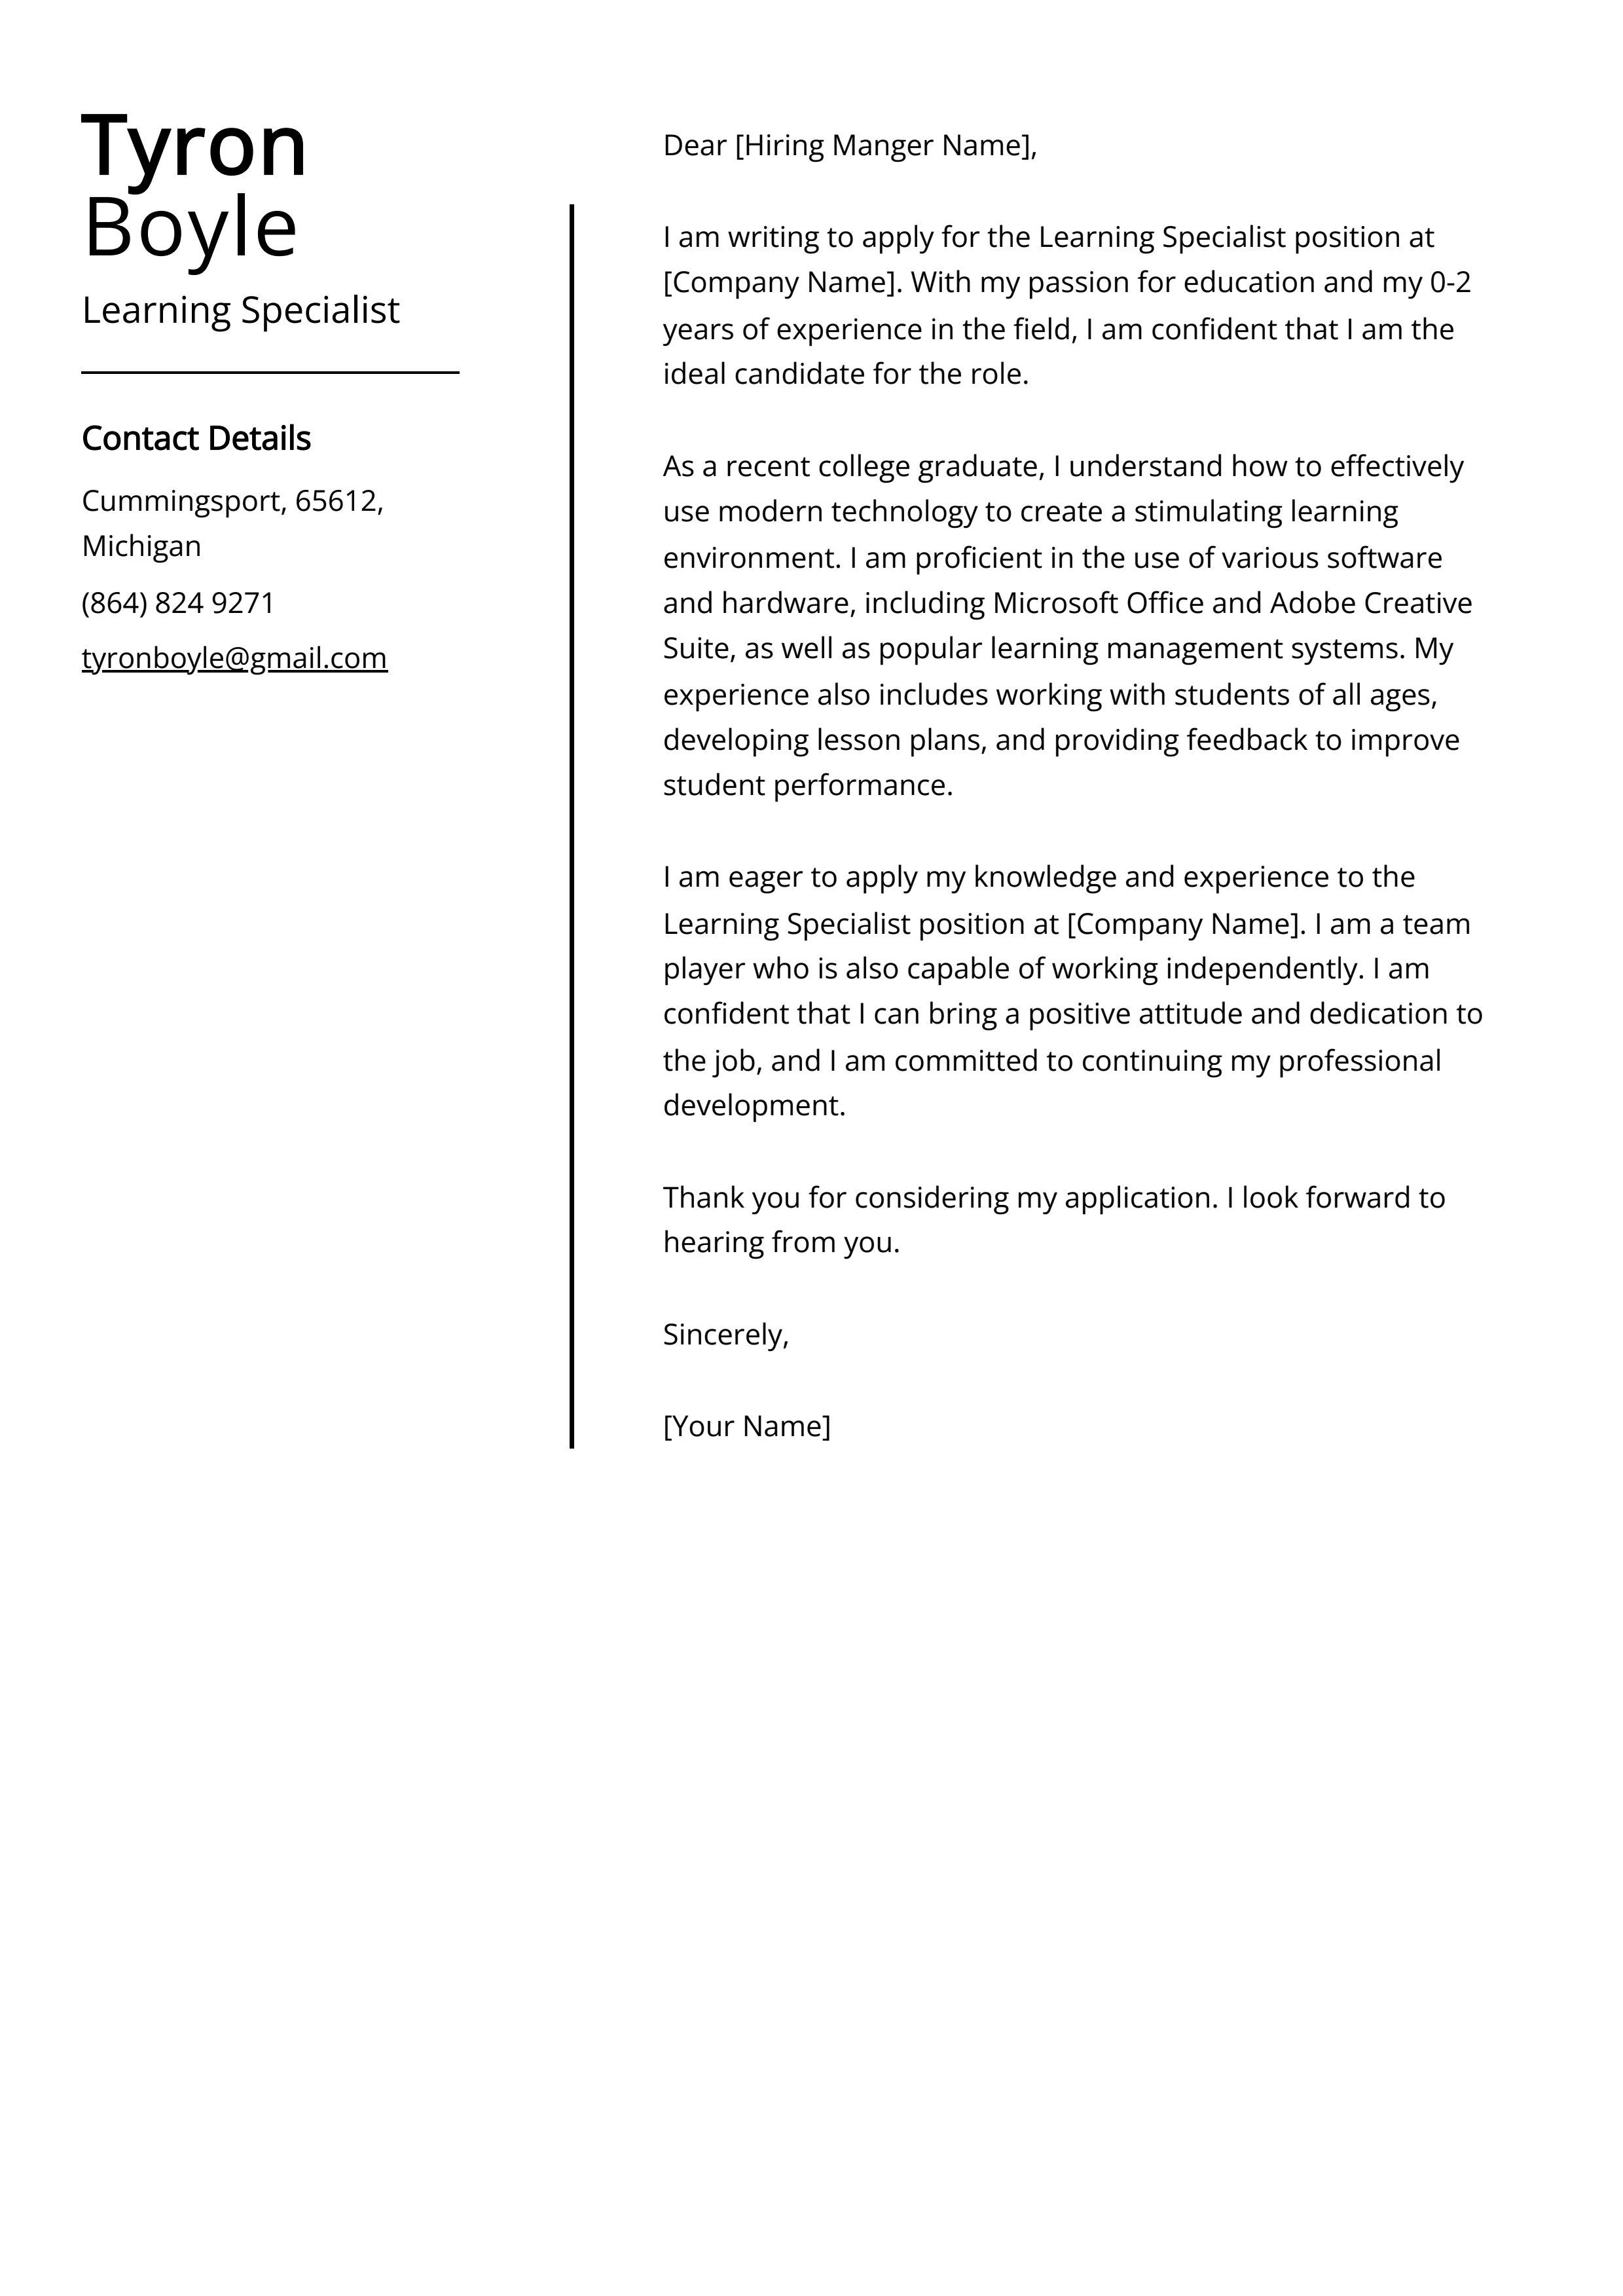 Learning Specialist Cover Letter Example